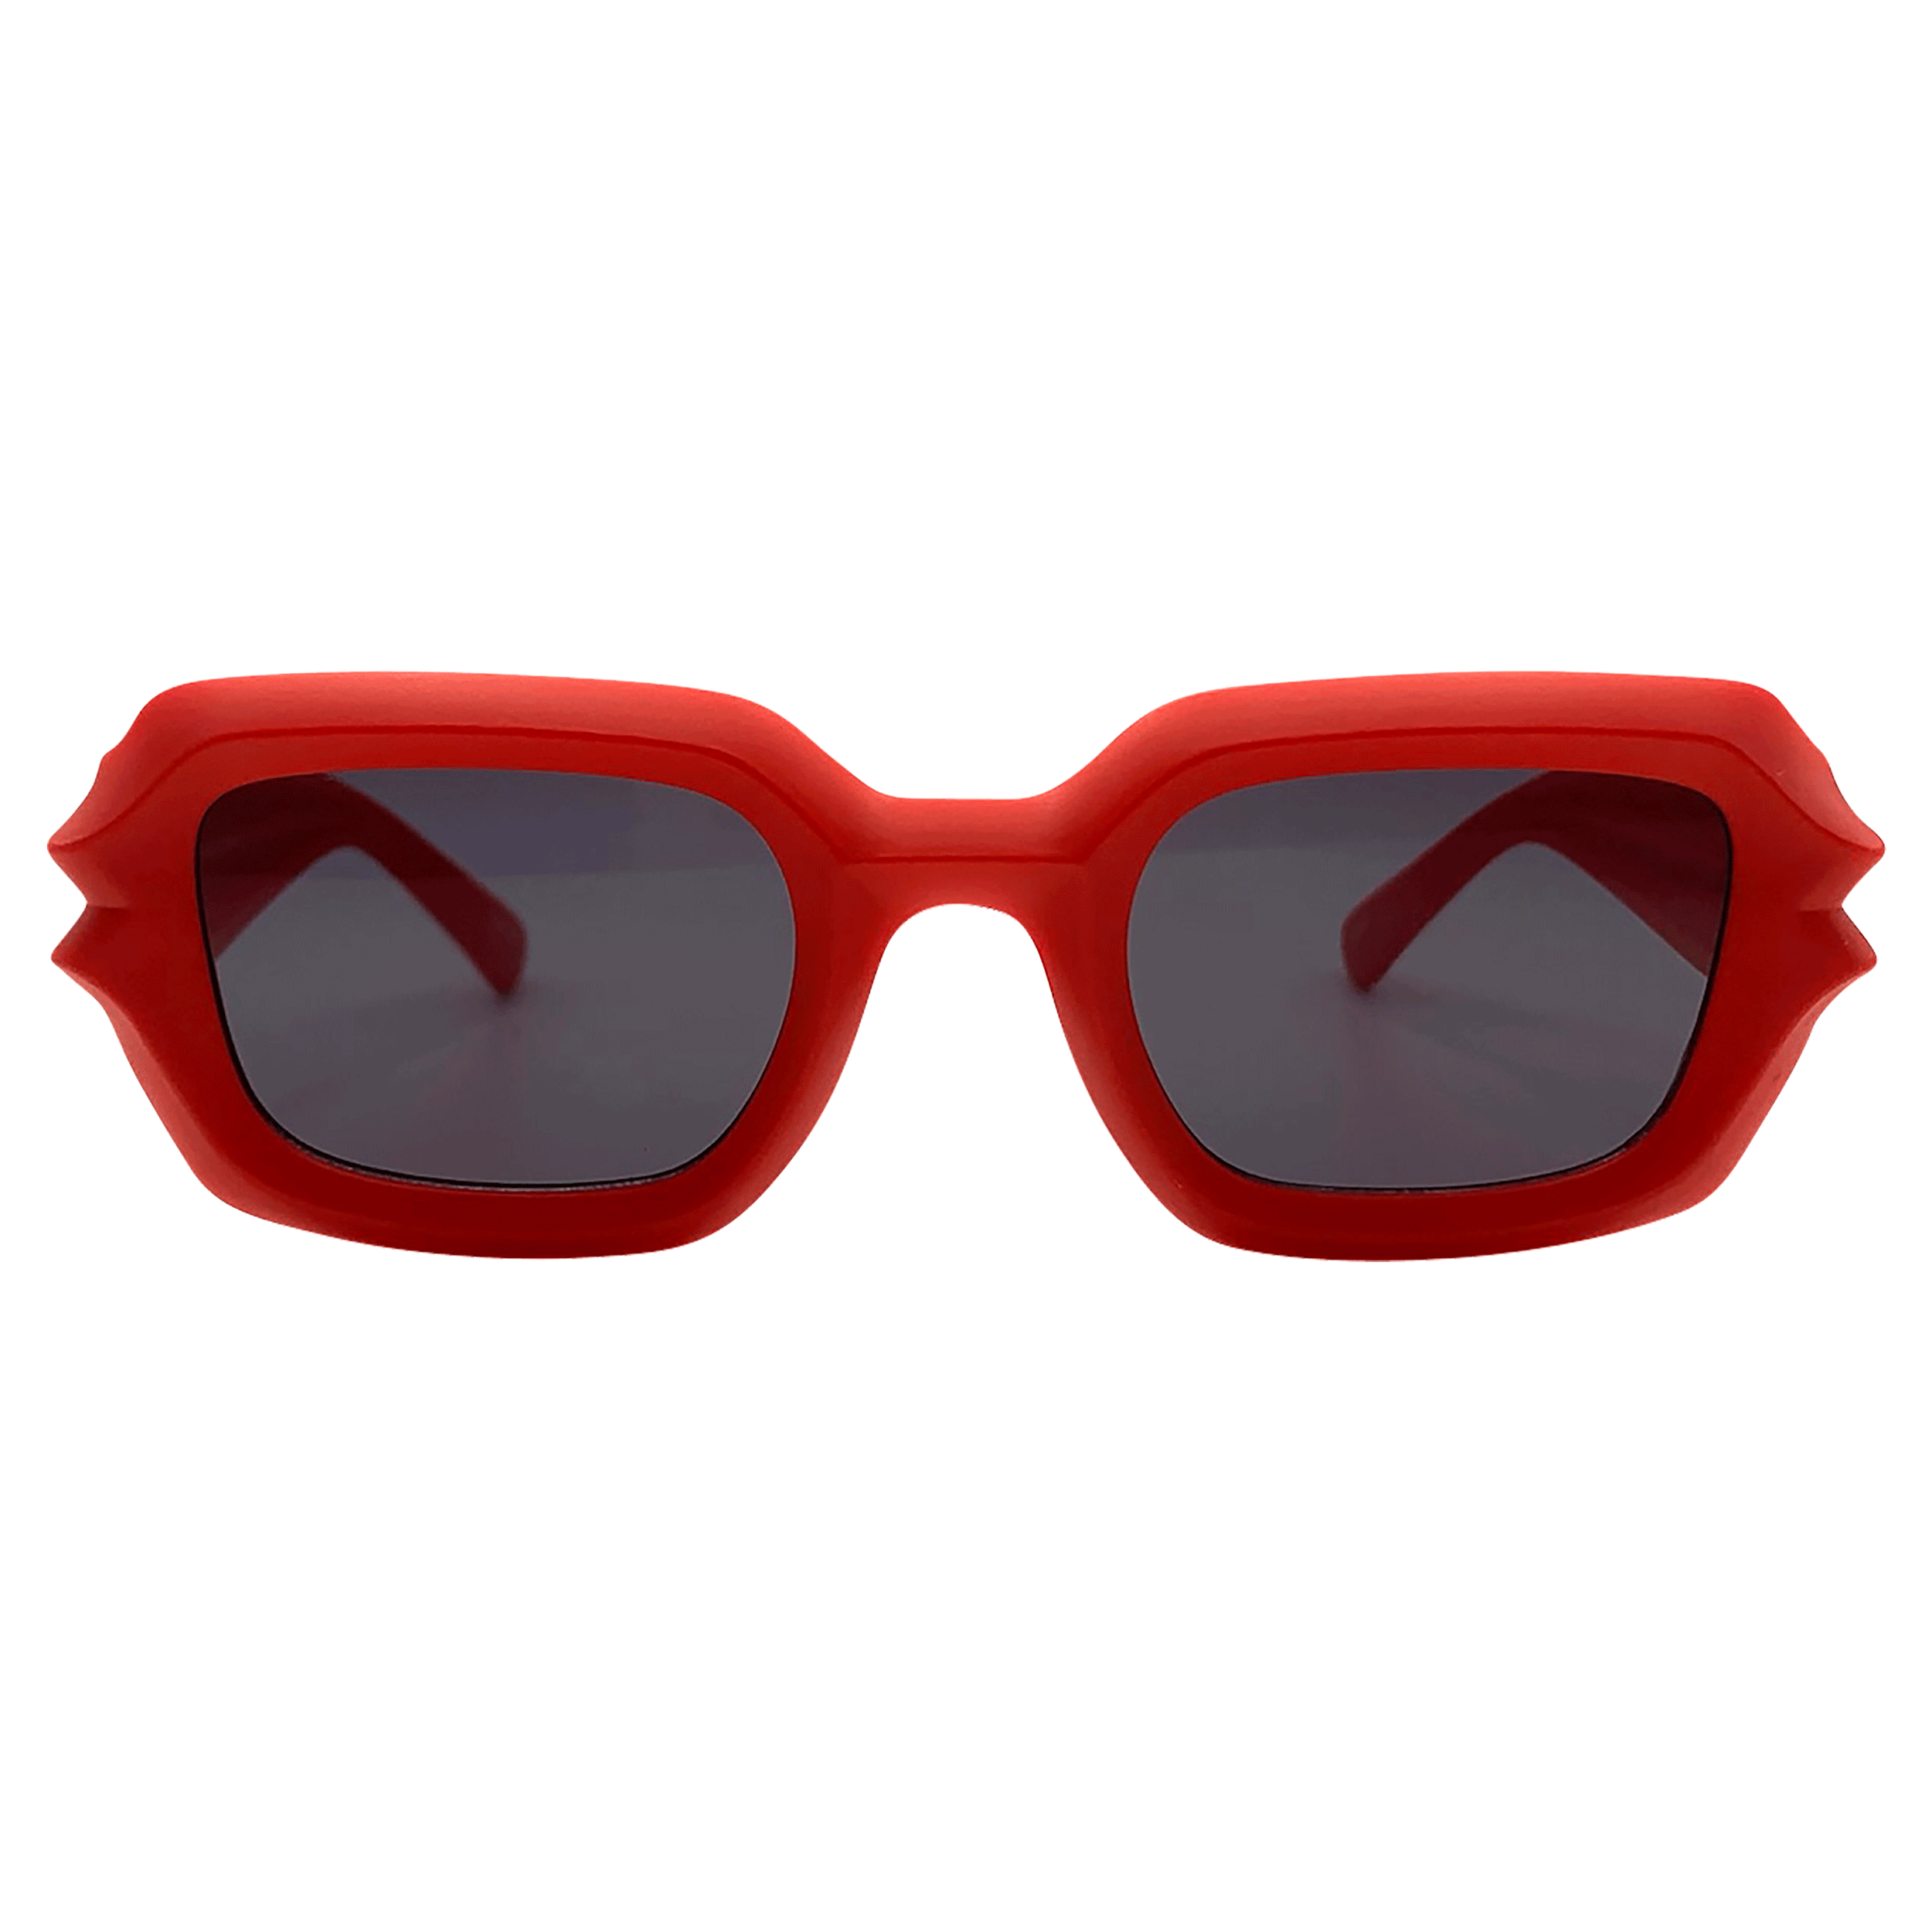 Flexible Teal Shield Sunglasses for Toddlers | Single Shield Shades